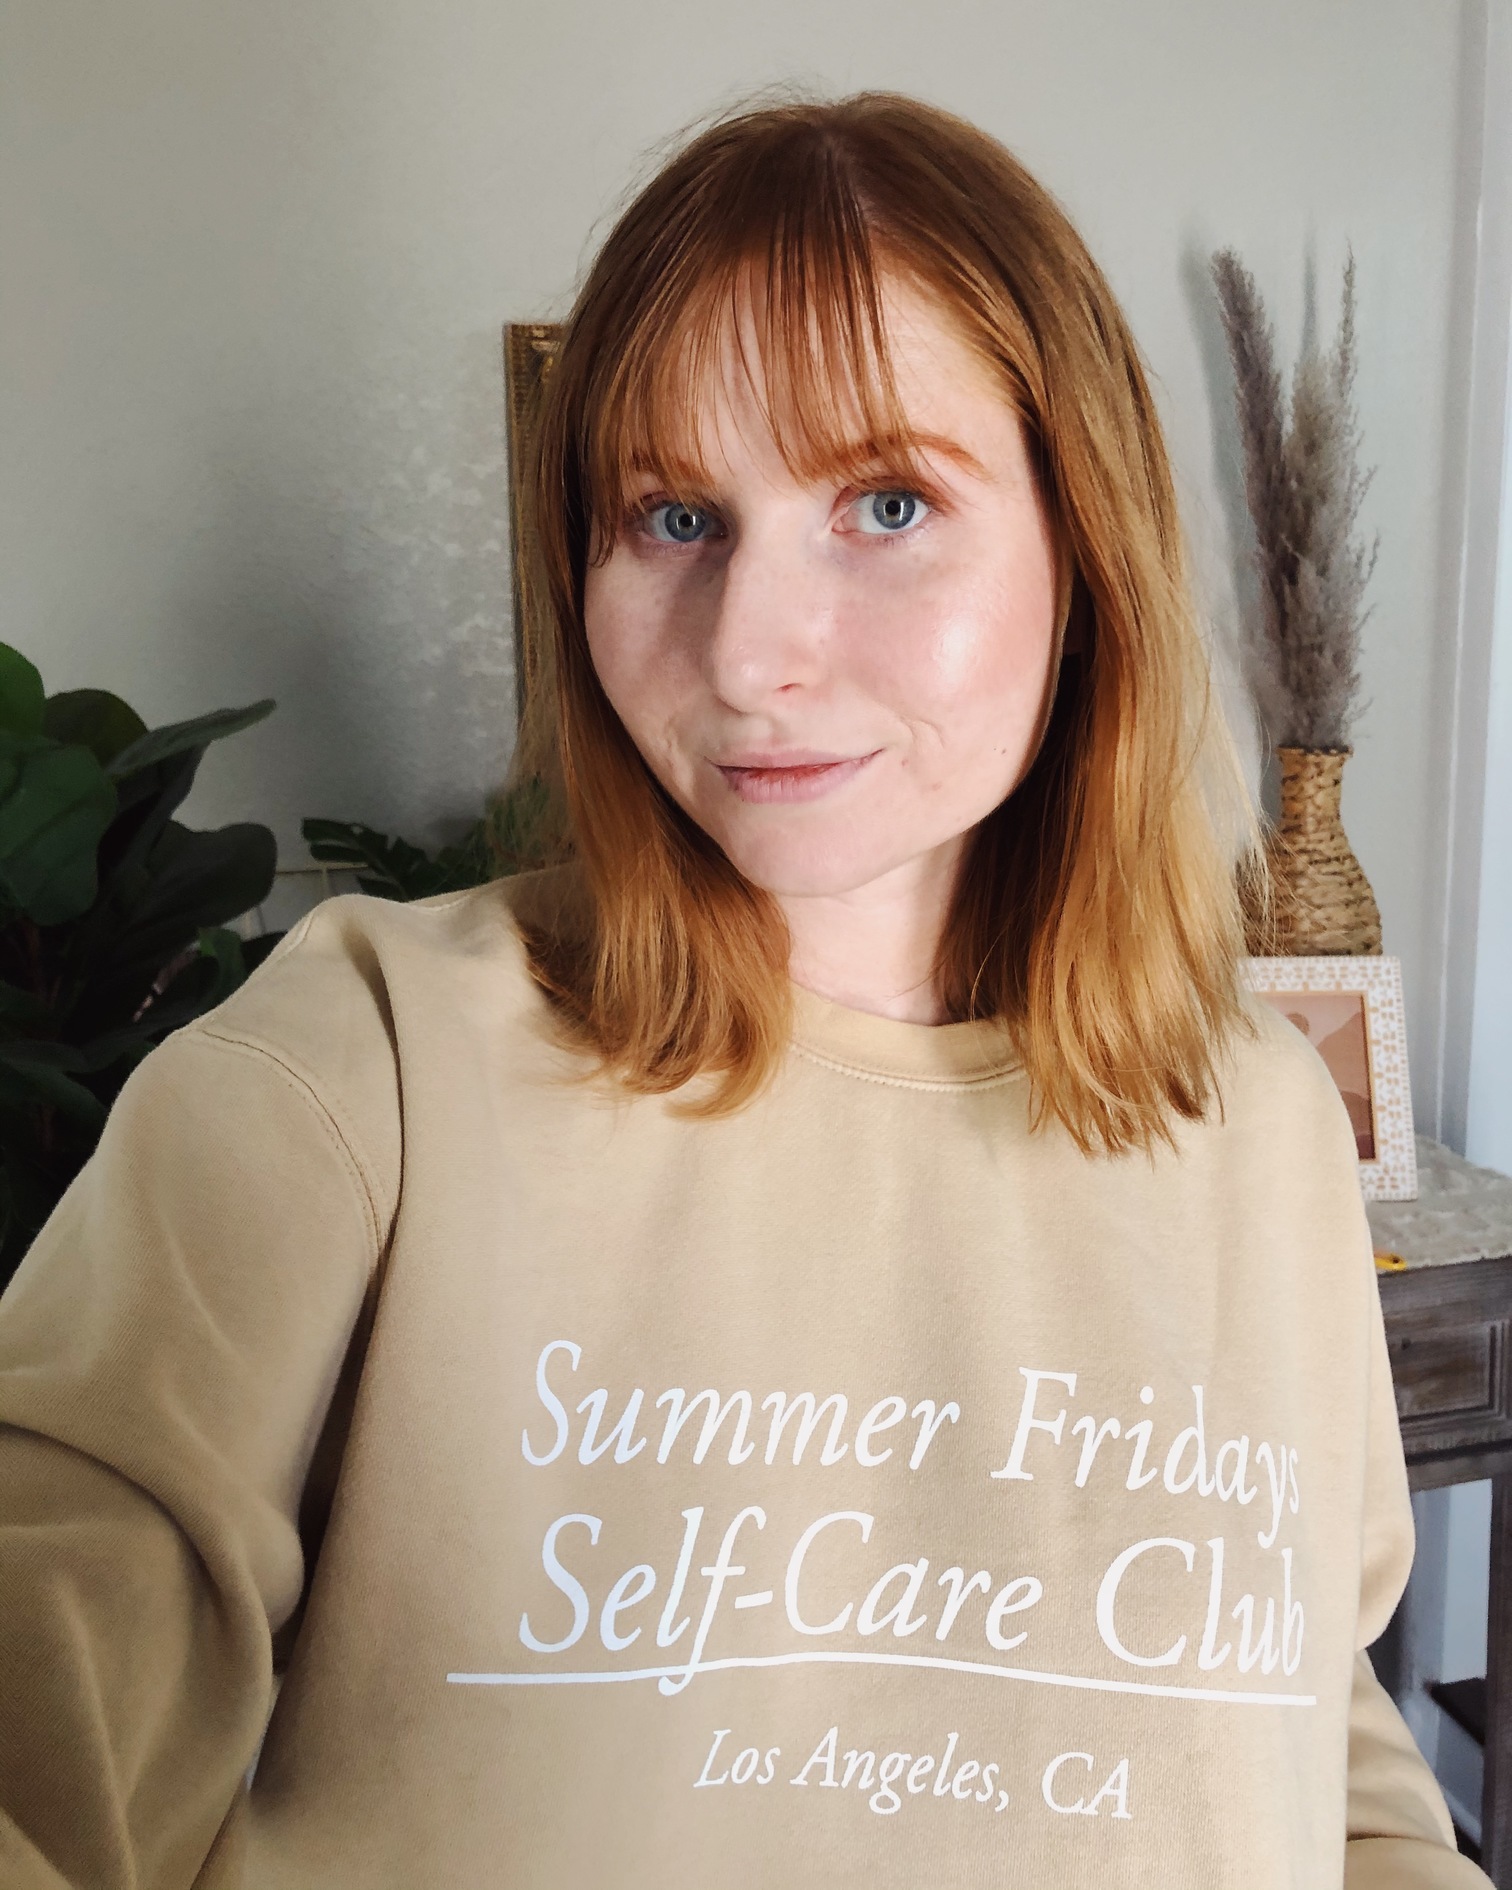 Best Loungewear For Women on Amazon | Women's Graphic Letter Print Round Neck Drop Shoulder Sweatshirt Pullover Tops | Summer Fridays Self-Care Club Sweatshirt | Affordable by Amanda, Florida Style Blogger